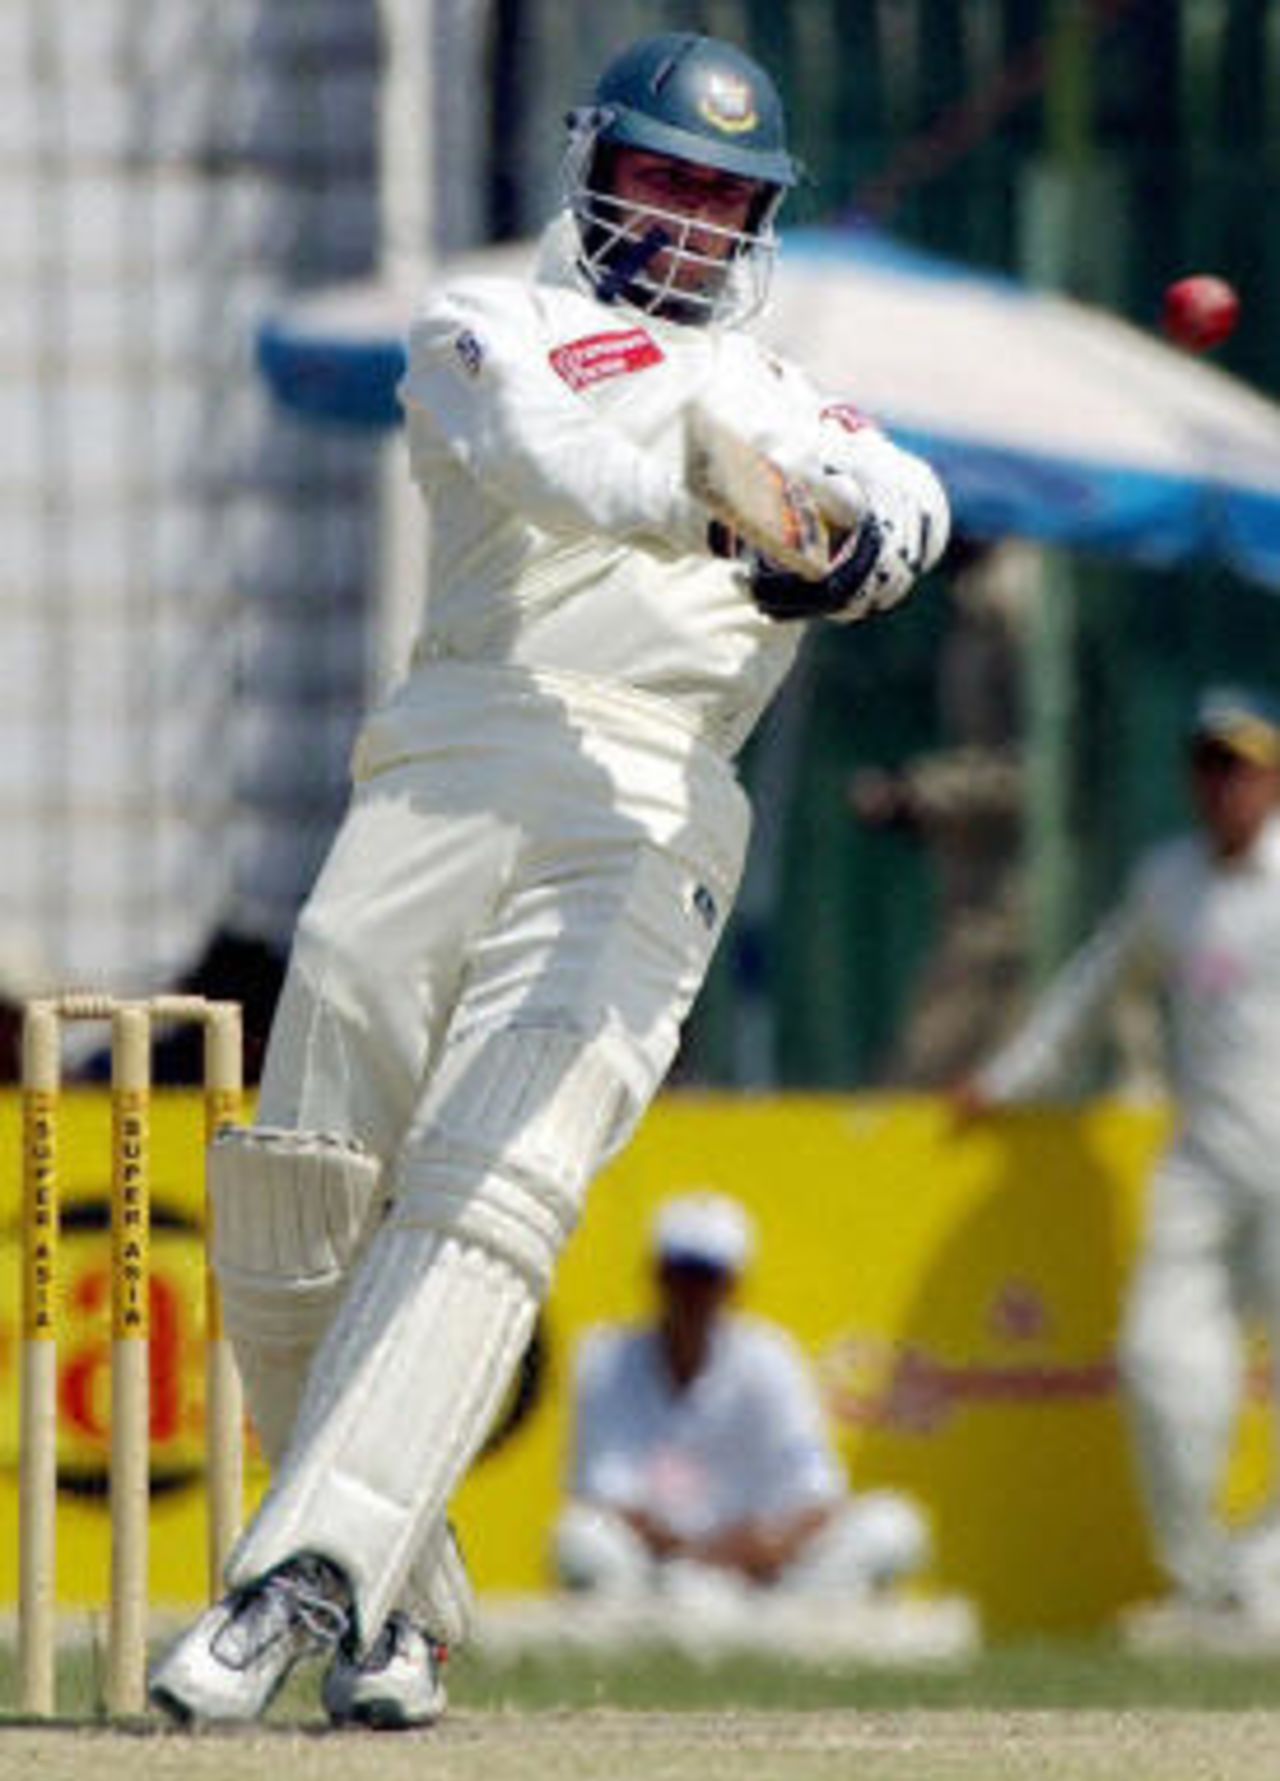 Mashrafe Mortaza hits a ball during the fourth day of the second Test between Pakistan and Bangladesh in Peshawar, 30 August 2003.